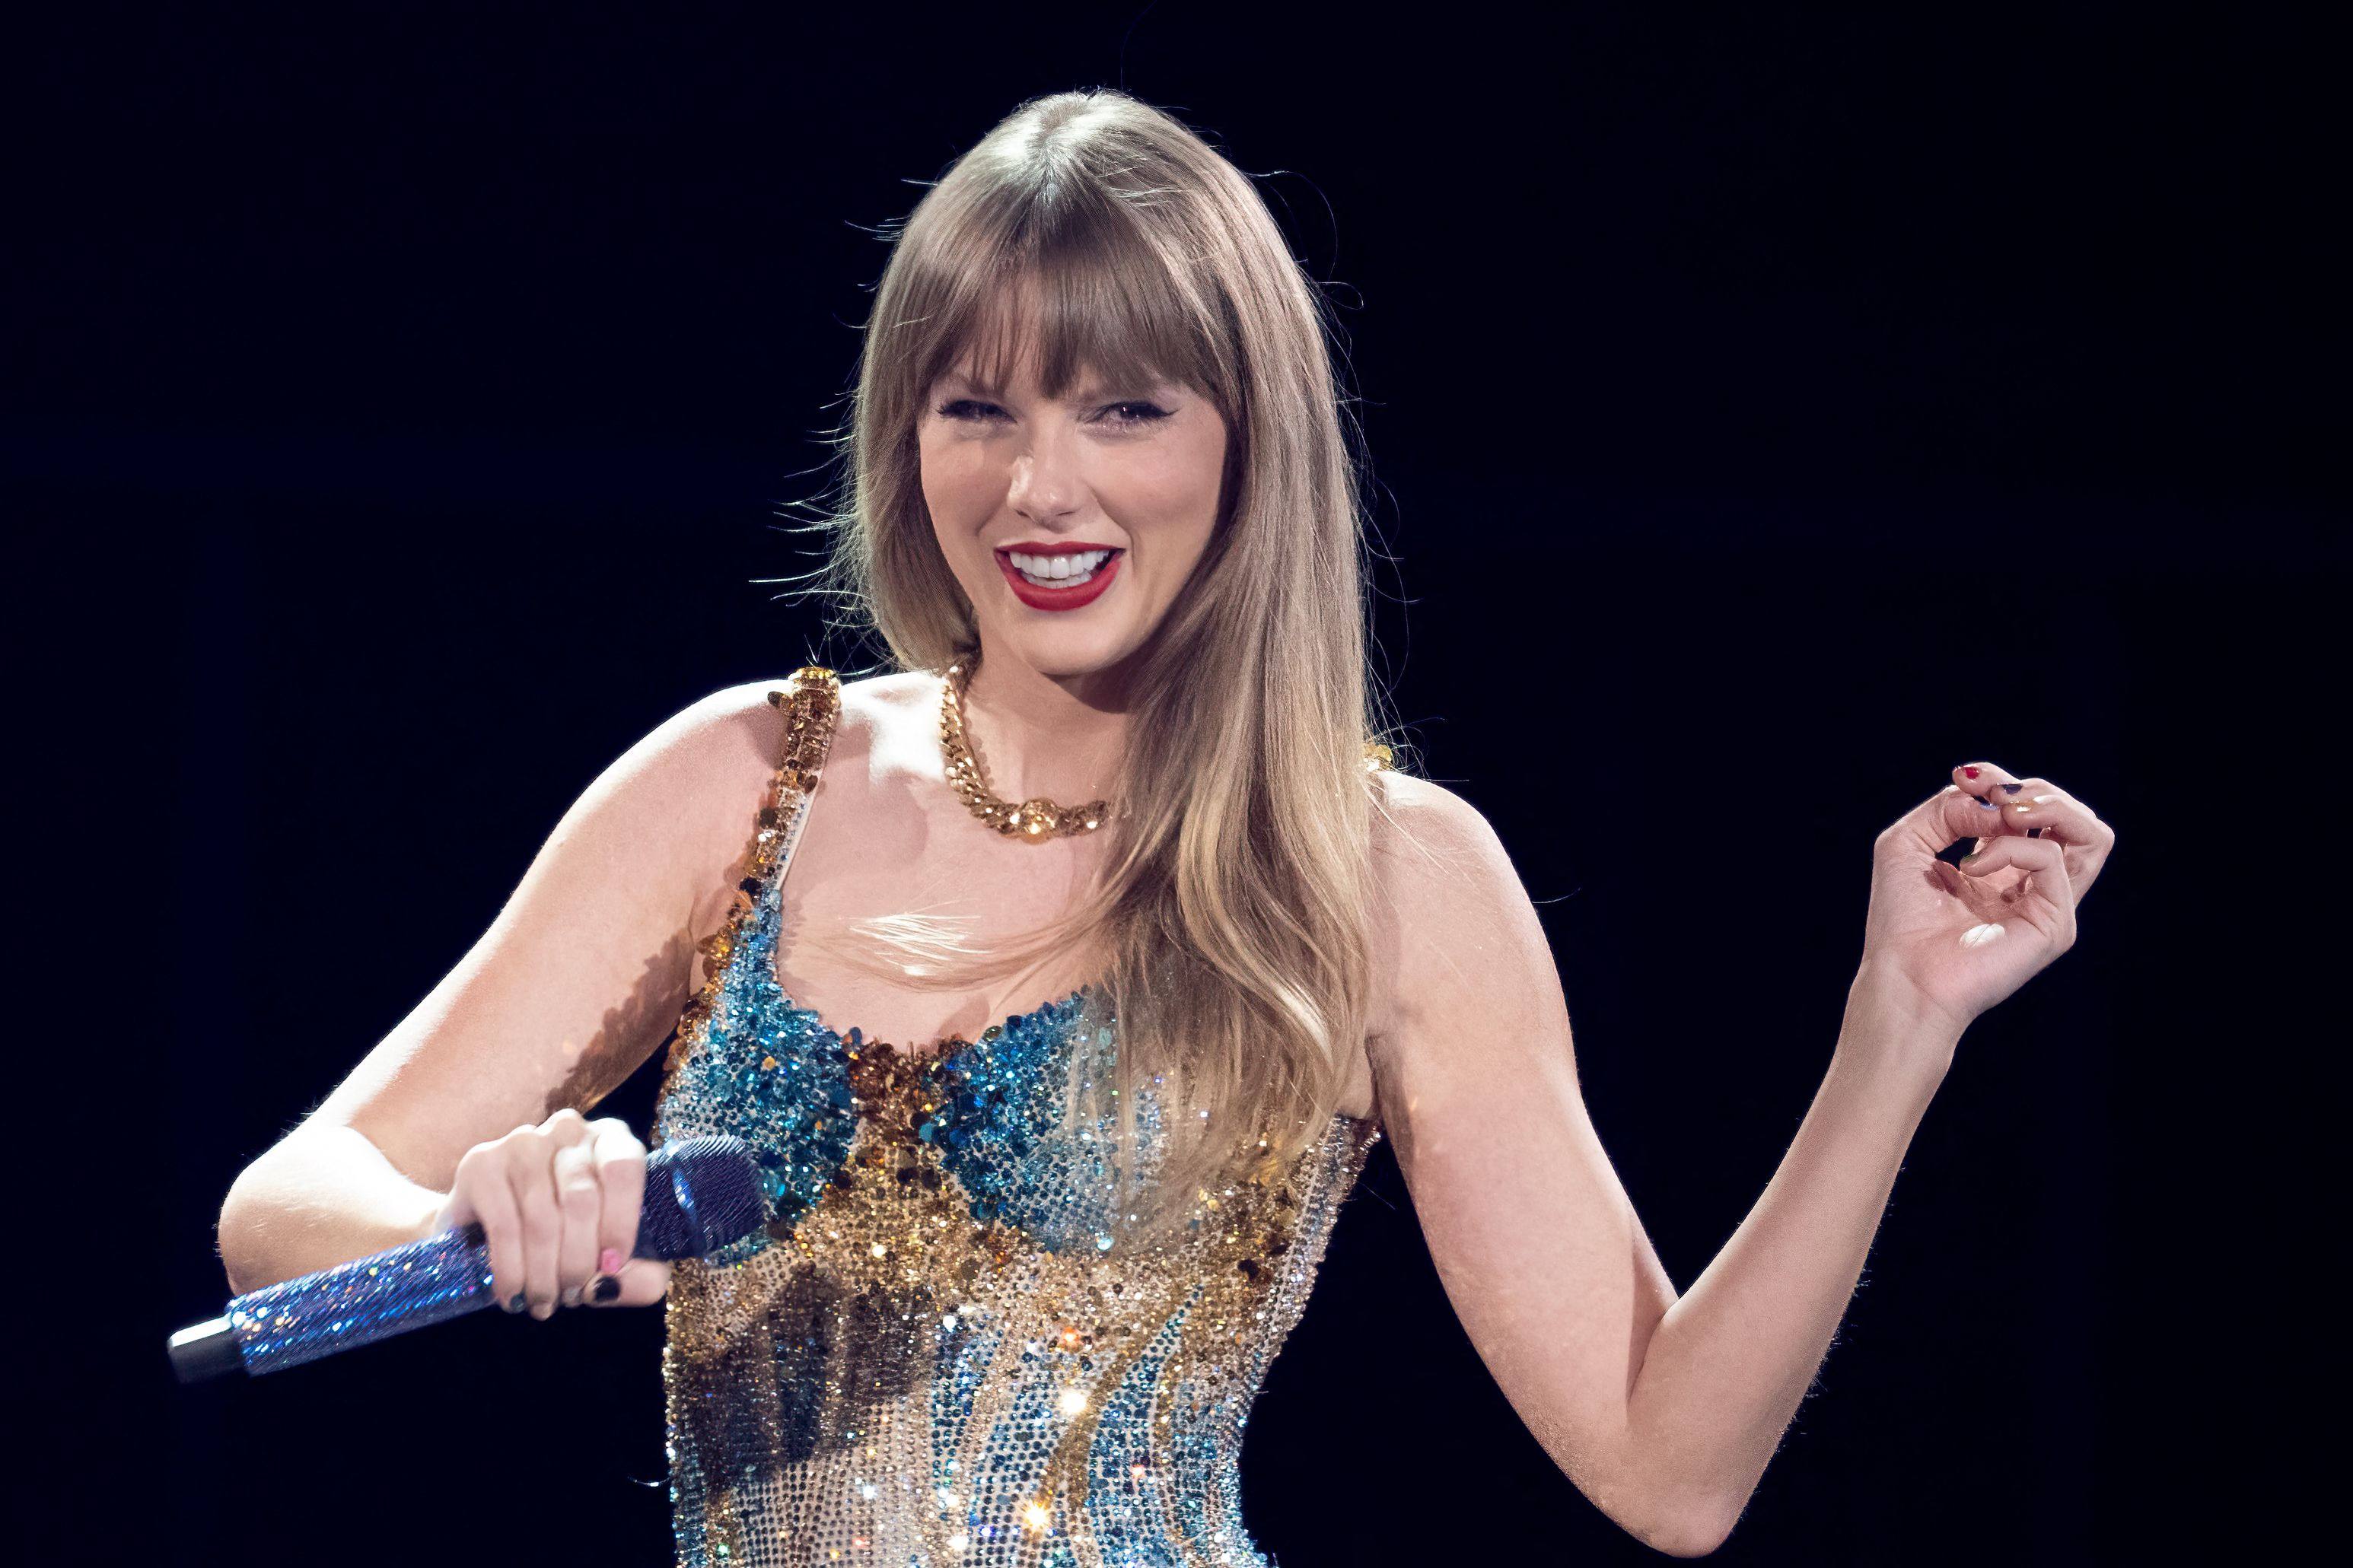 Taylor Swift has made US$300 million from 22 shows so far and with ticket sales of more than US$13 million each night while on the road, The Eras Tour is set to become the highest-grossing tour in music history. Photo: AFP